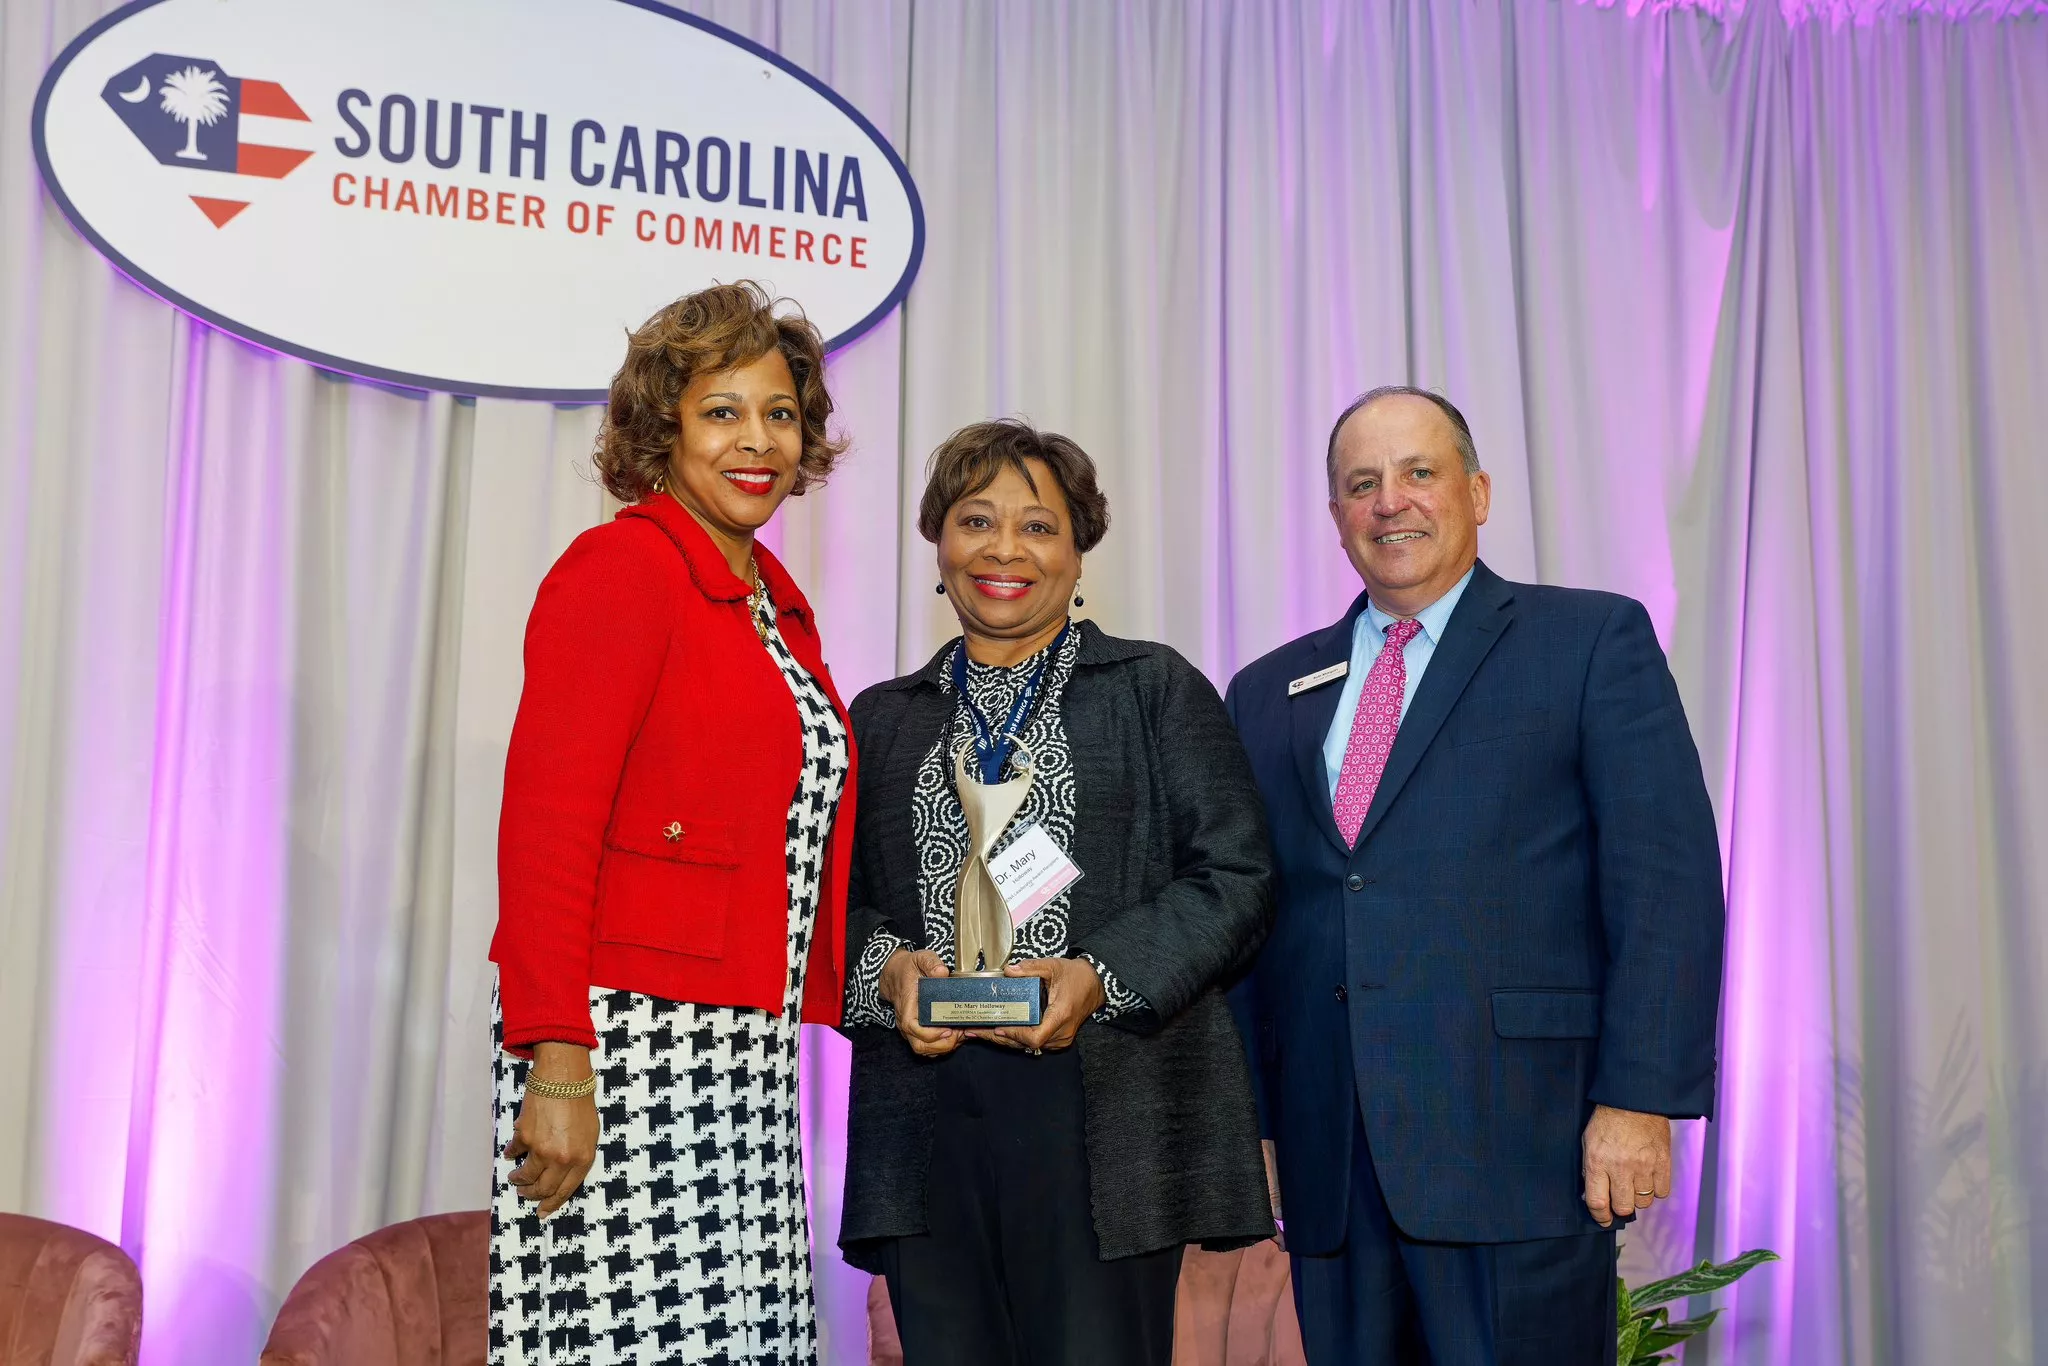 Pictured left to right: S.C. Chamber Chief Diversity Officer Cynthia Bennett, Dr. Mary Holloway, S.C. Chamber President & CEO Bob Morgan